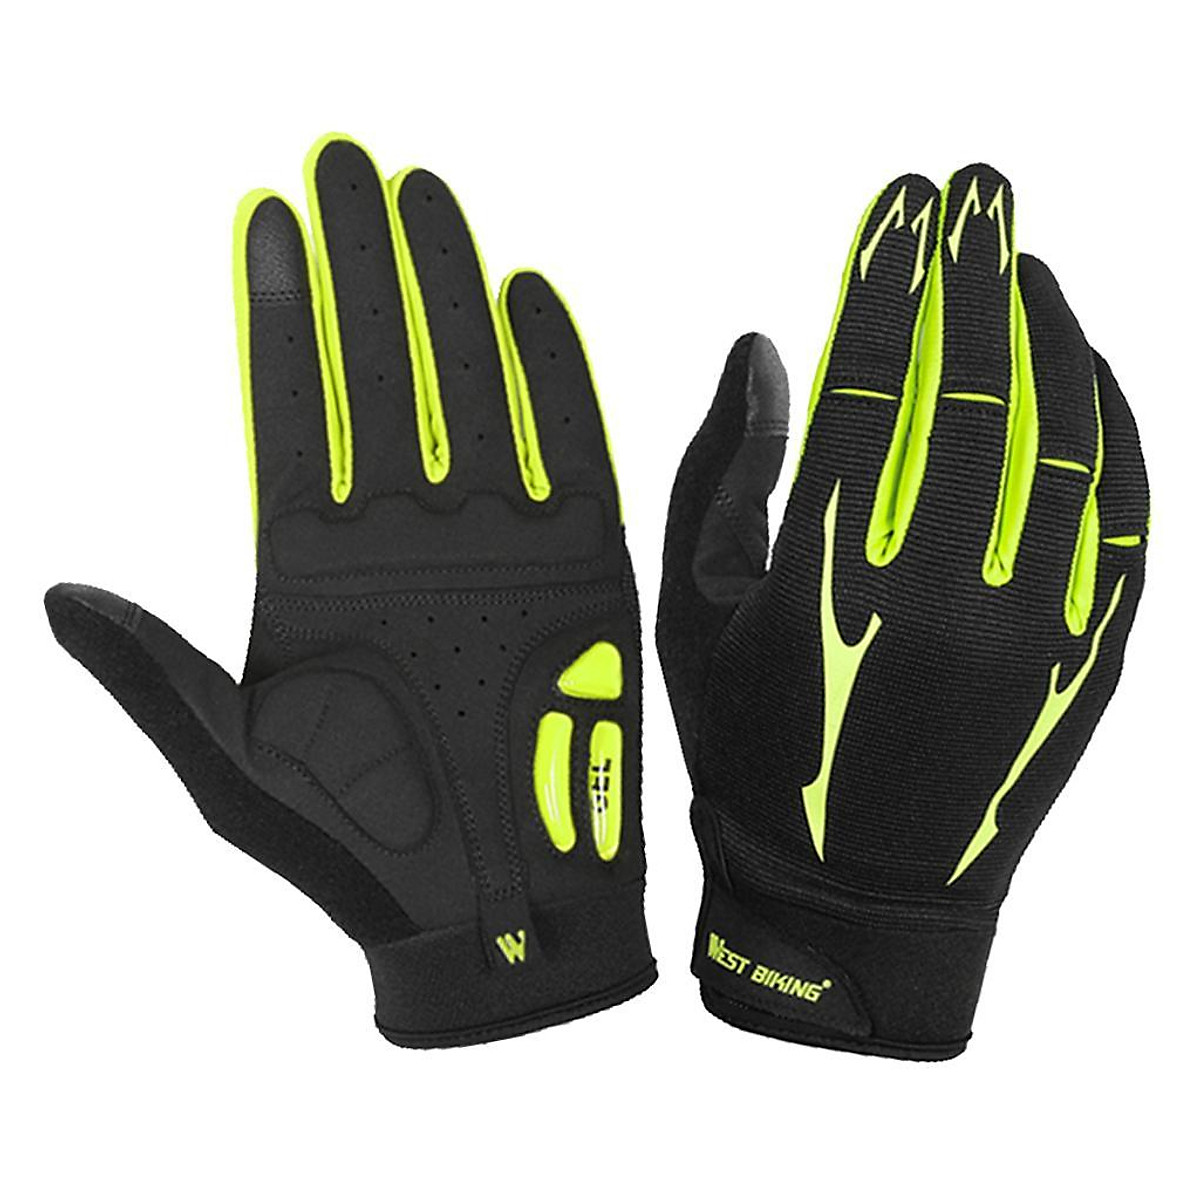 selection of mountain bike gloves in different colors and styles